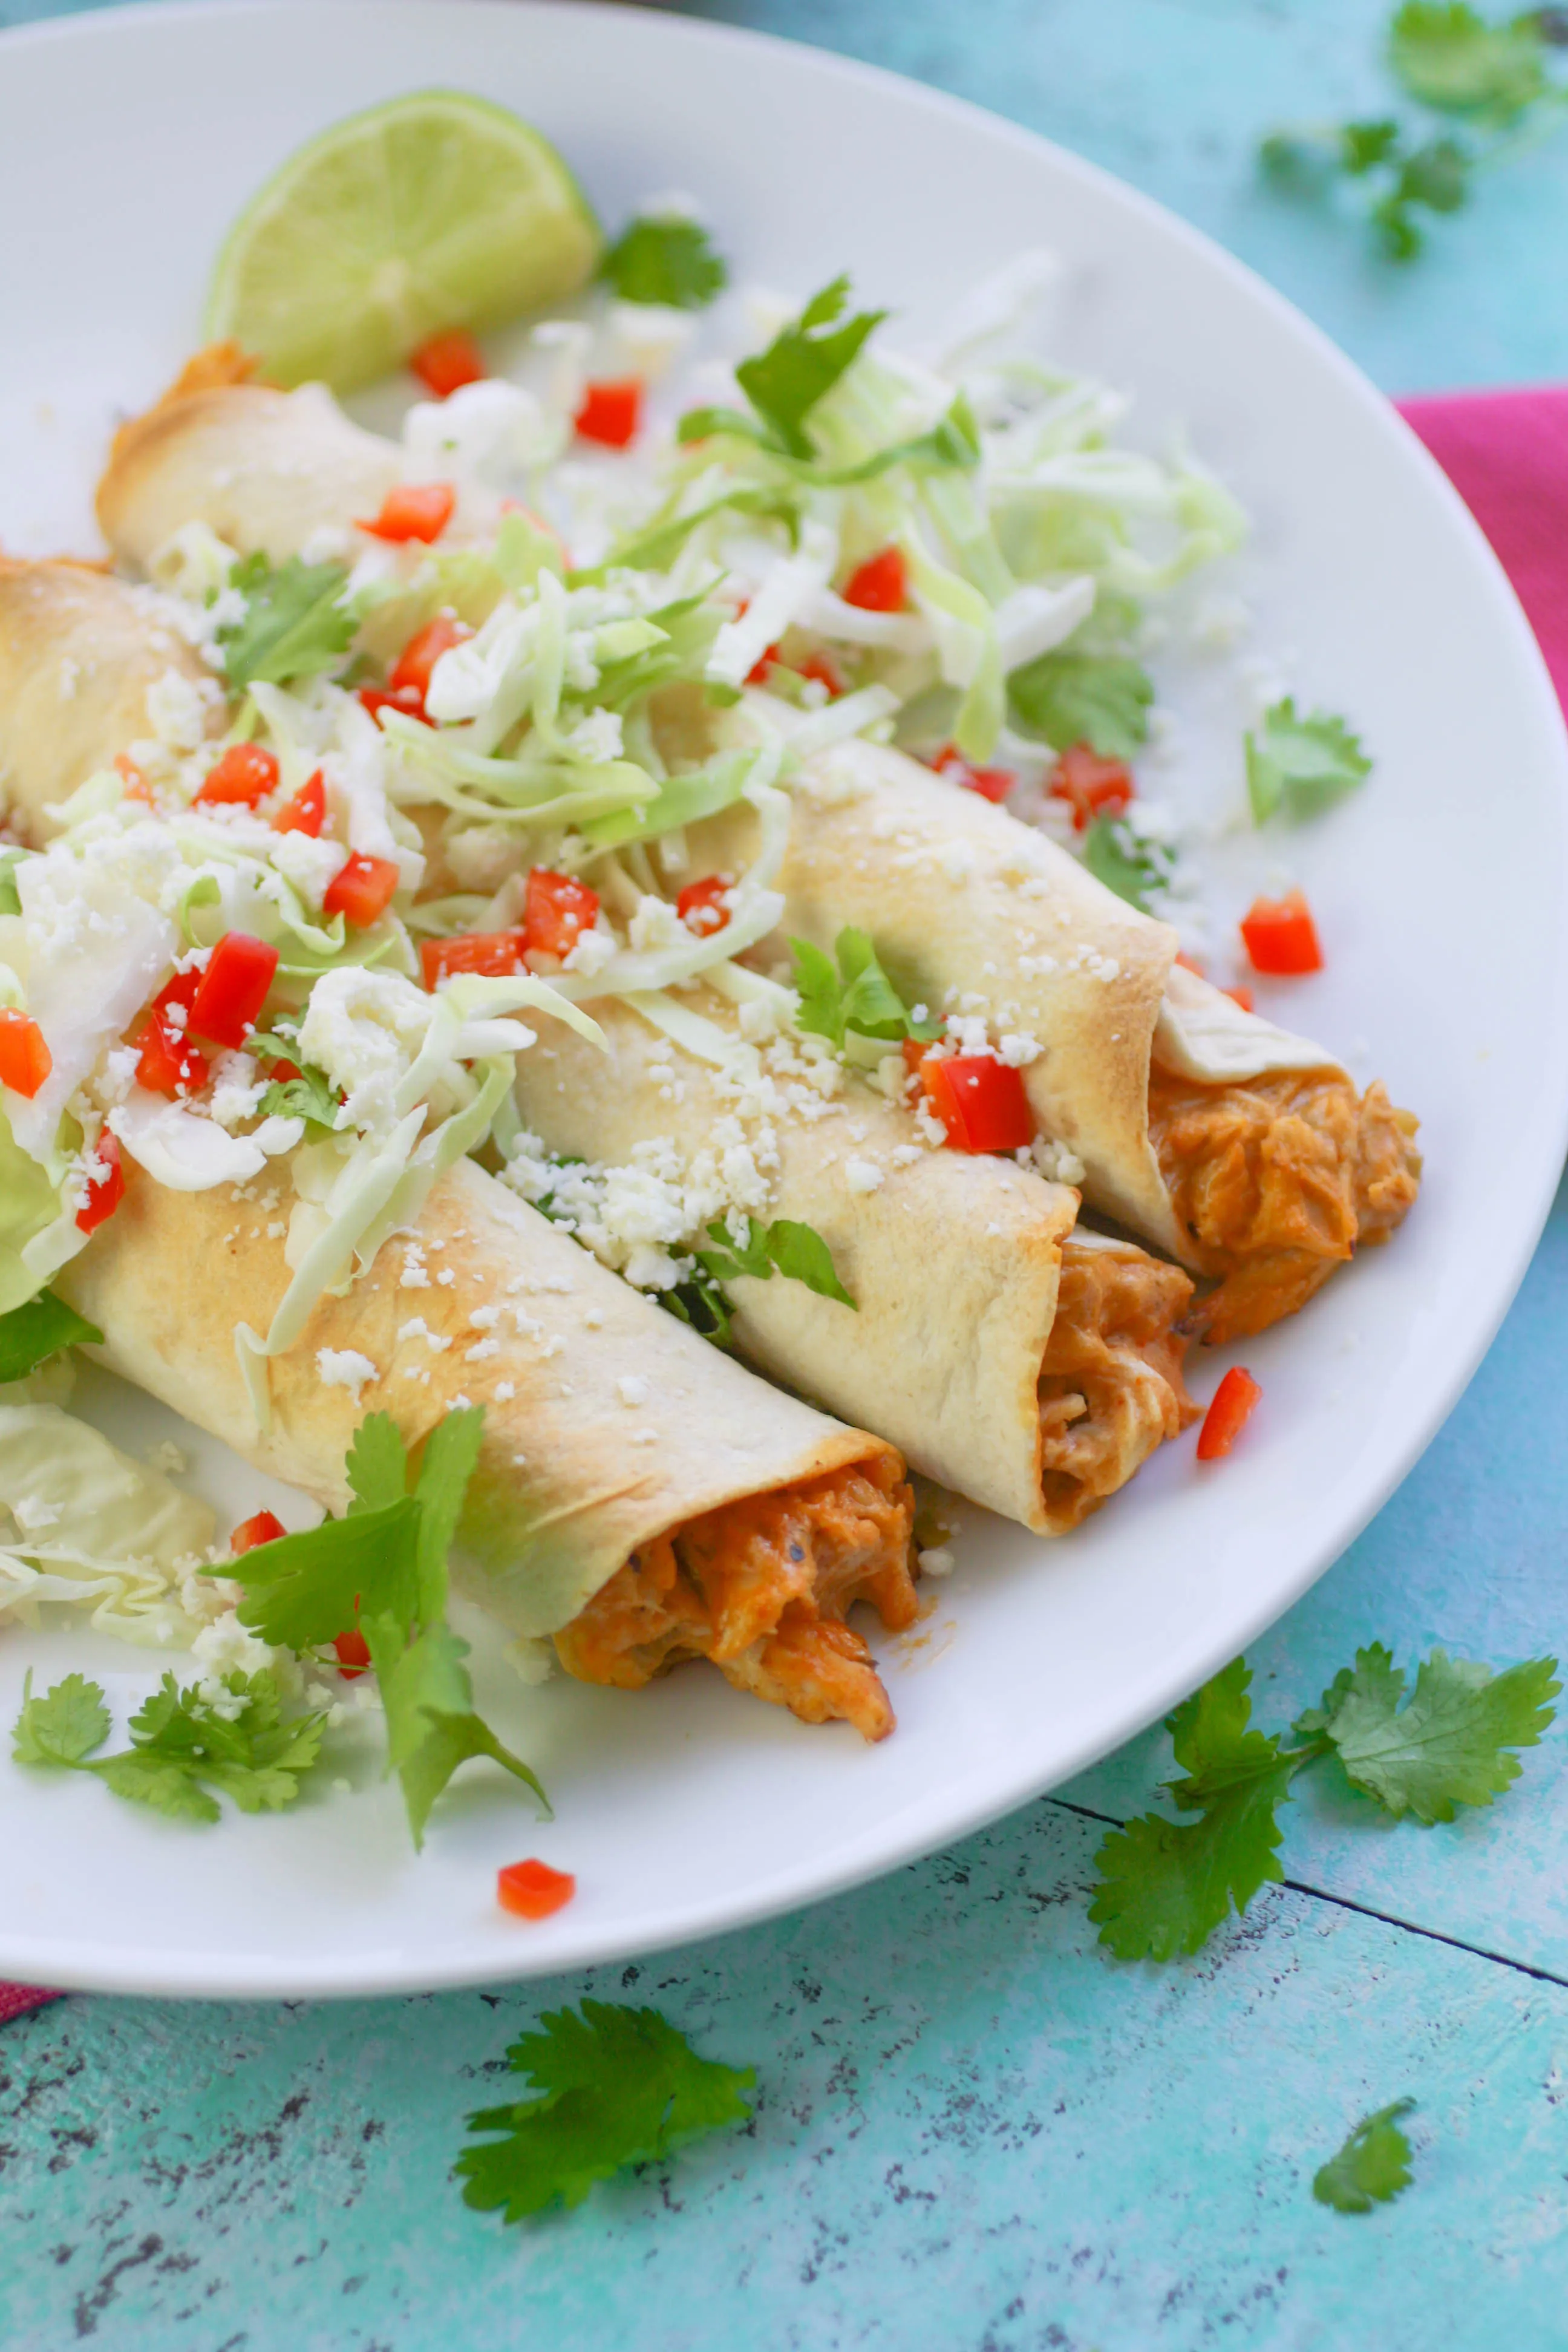 Baked Chicken and Green Chile Taquitos are filling and easy to make as a snack or part of a light meal. Baked Chicken and Green Chile Taquitos are a Mexican-inspired favorite to serve anytime! 